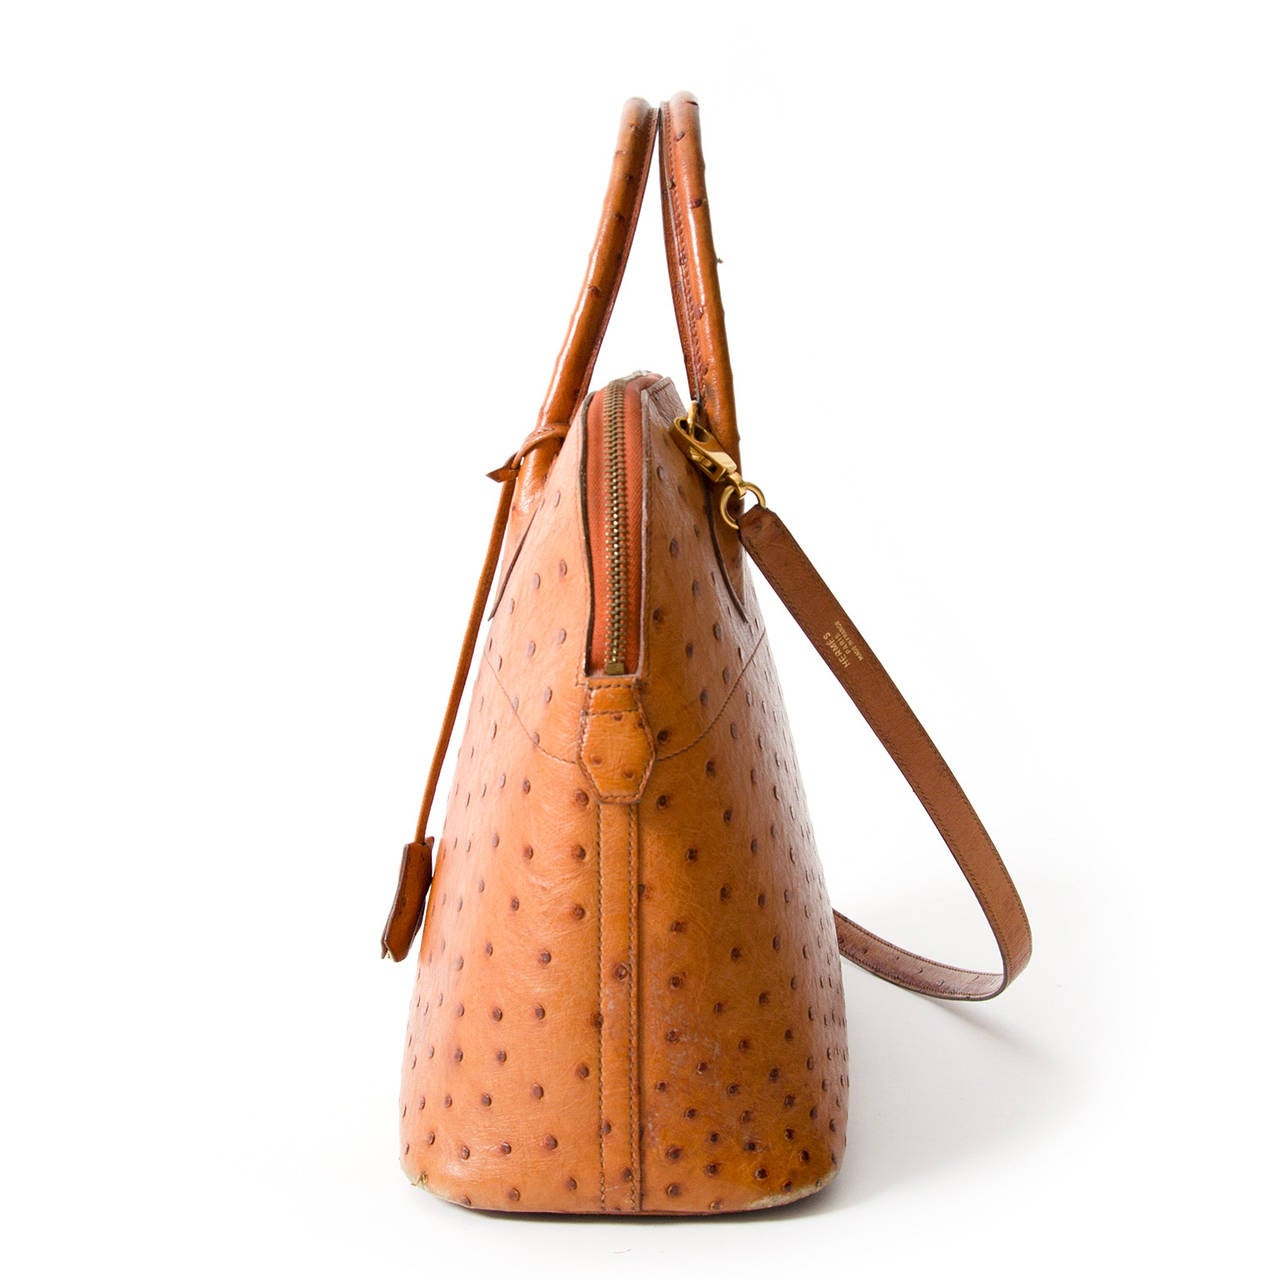 The Hermès Bolide in cognac ostrich leather is a classic bag, which unquestionably embodies femininity and class. It is a domed top handle bag with a zip around closure. The gold hardware adds a luxurious feel to this stunning piece. The interior